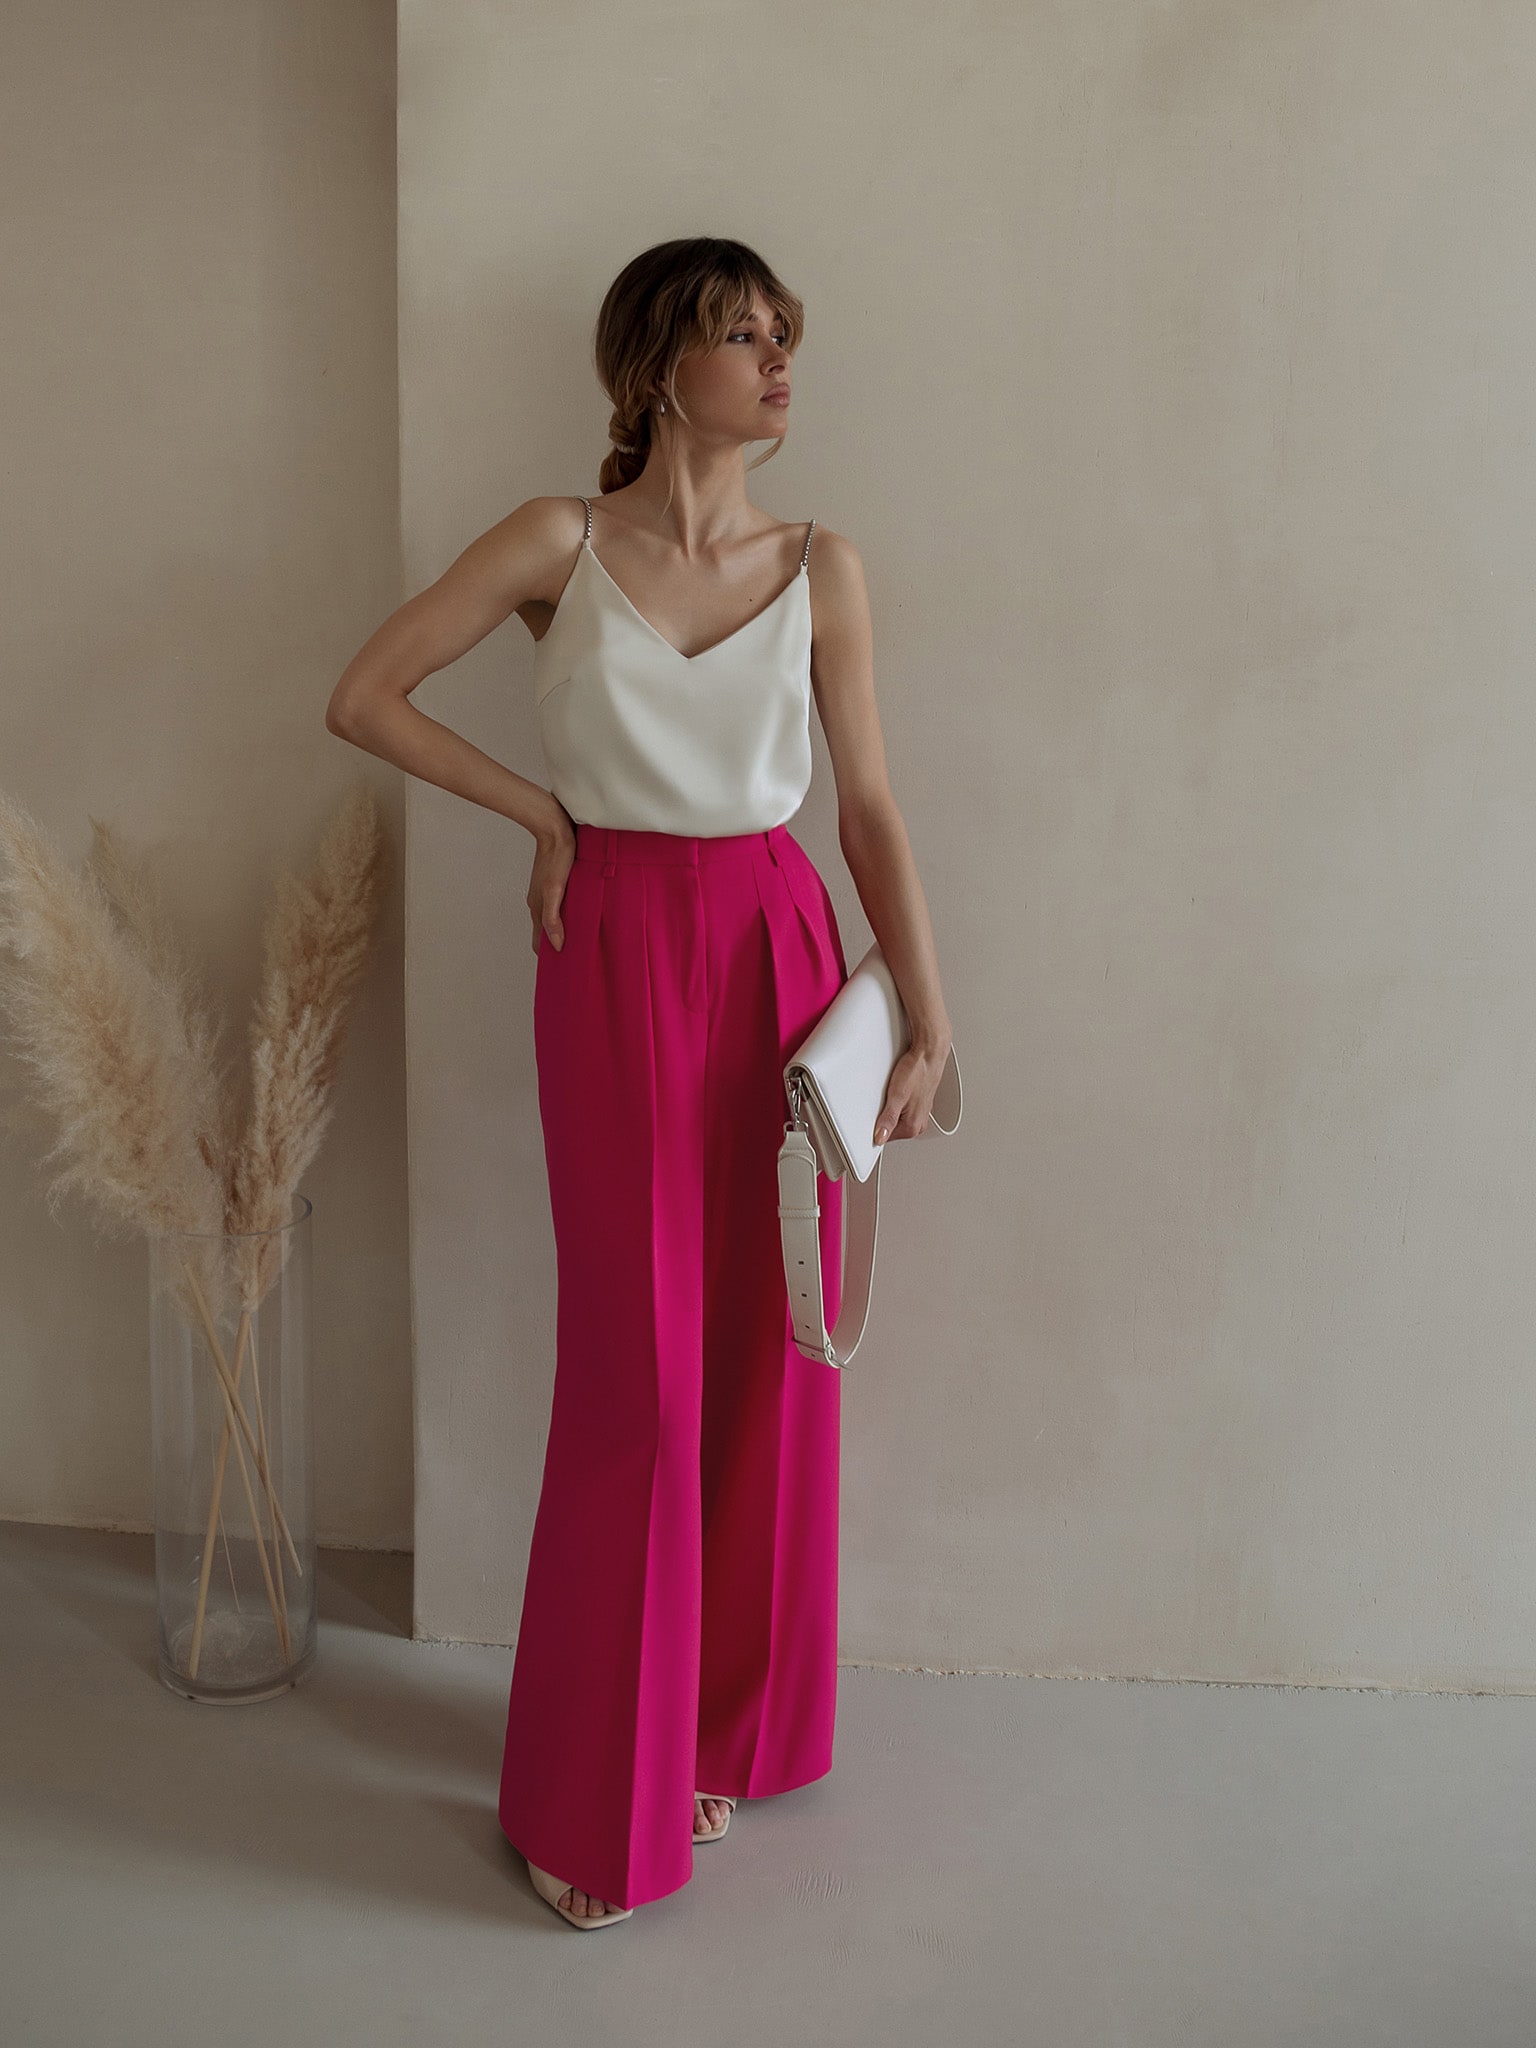 Pleated palazzo pants with creases